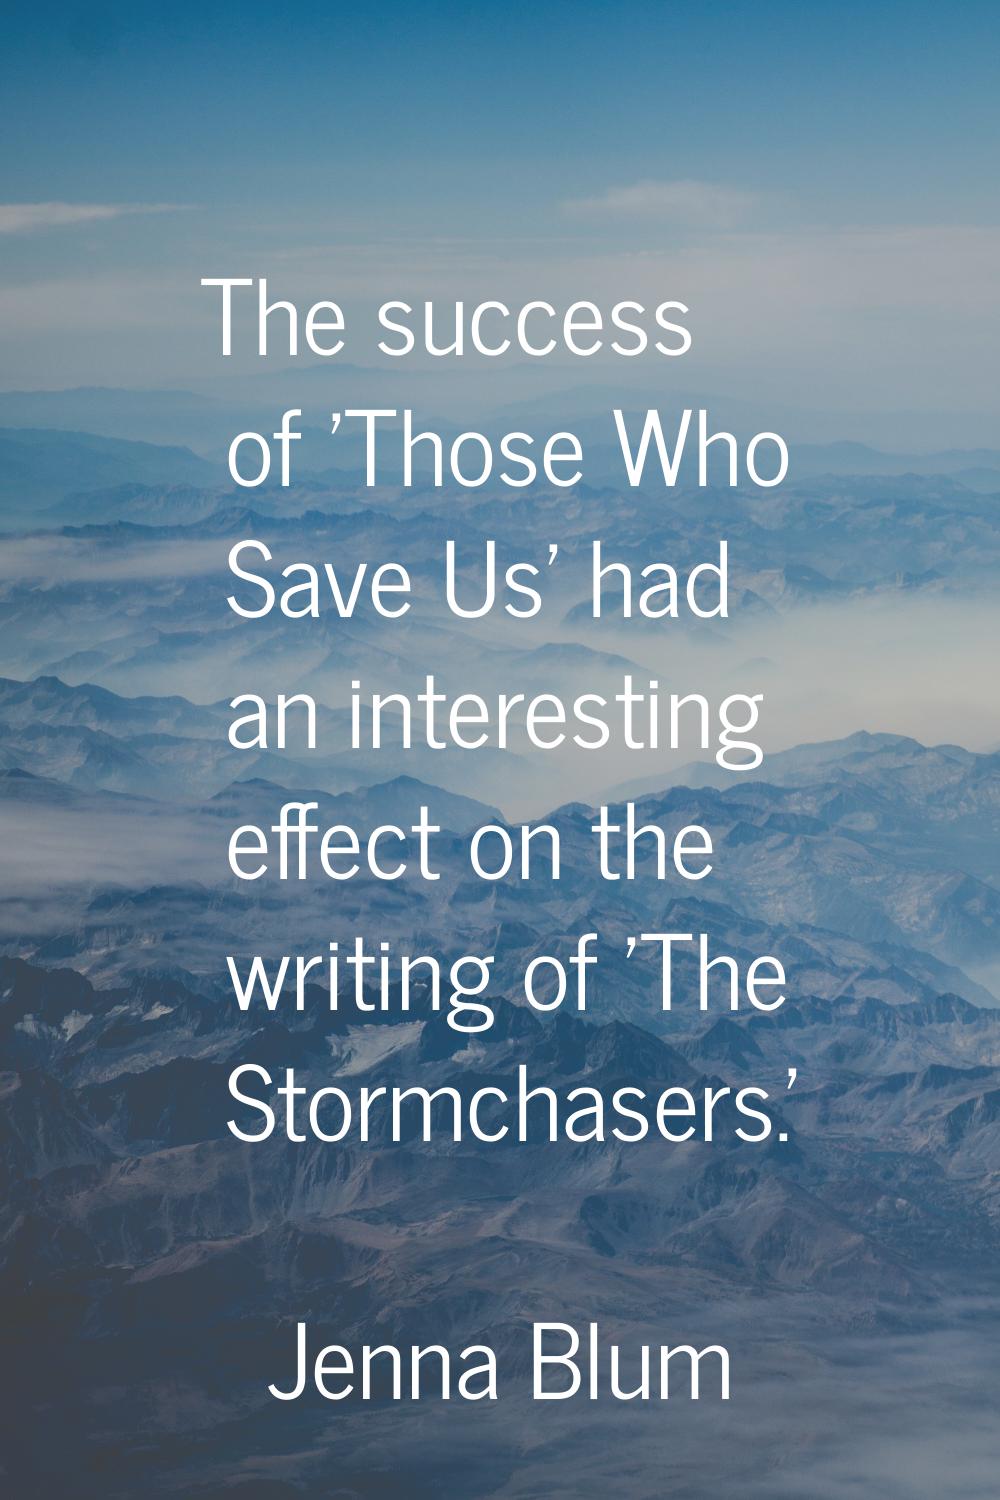 The success of 'Those Who Save Us' had an interesting effect on the writing of 'The Stormchasers.'